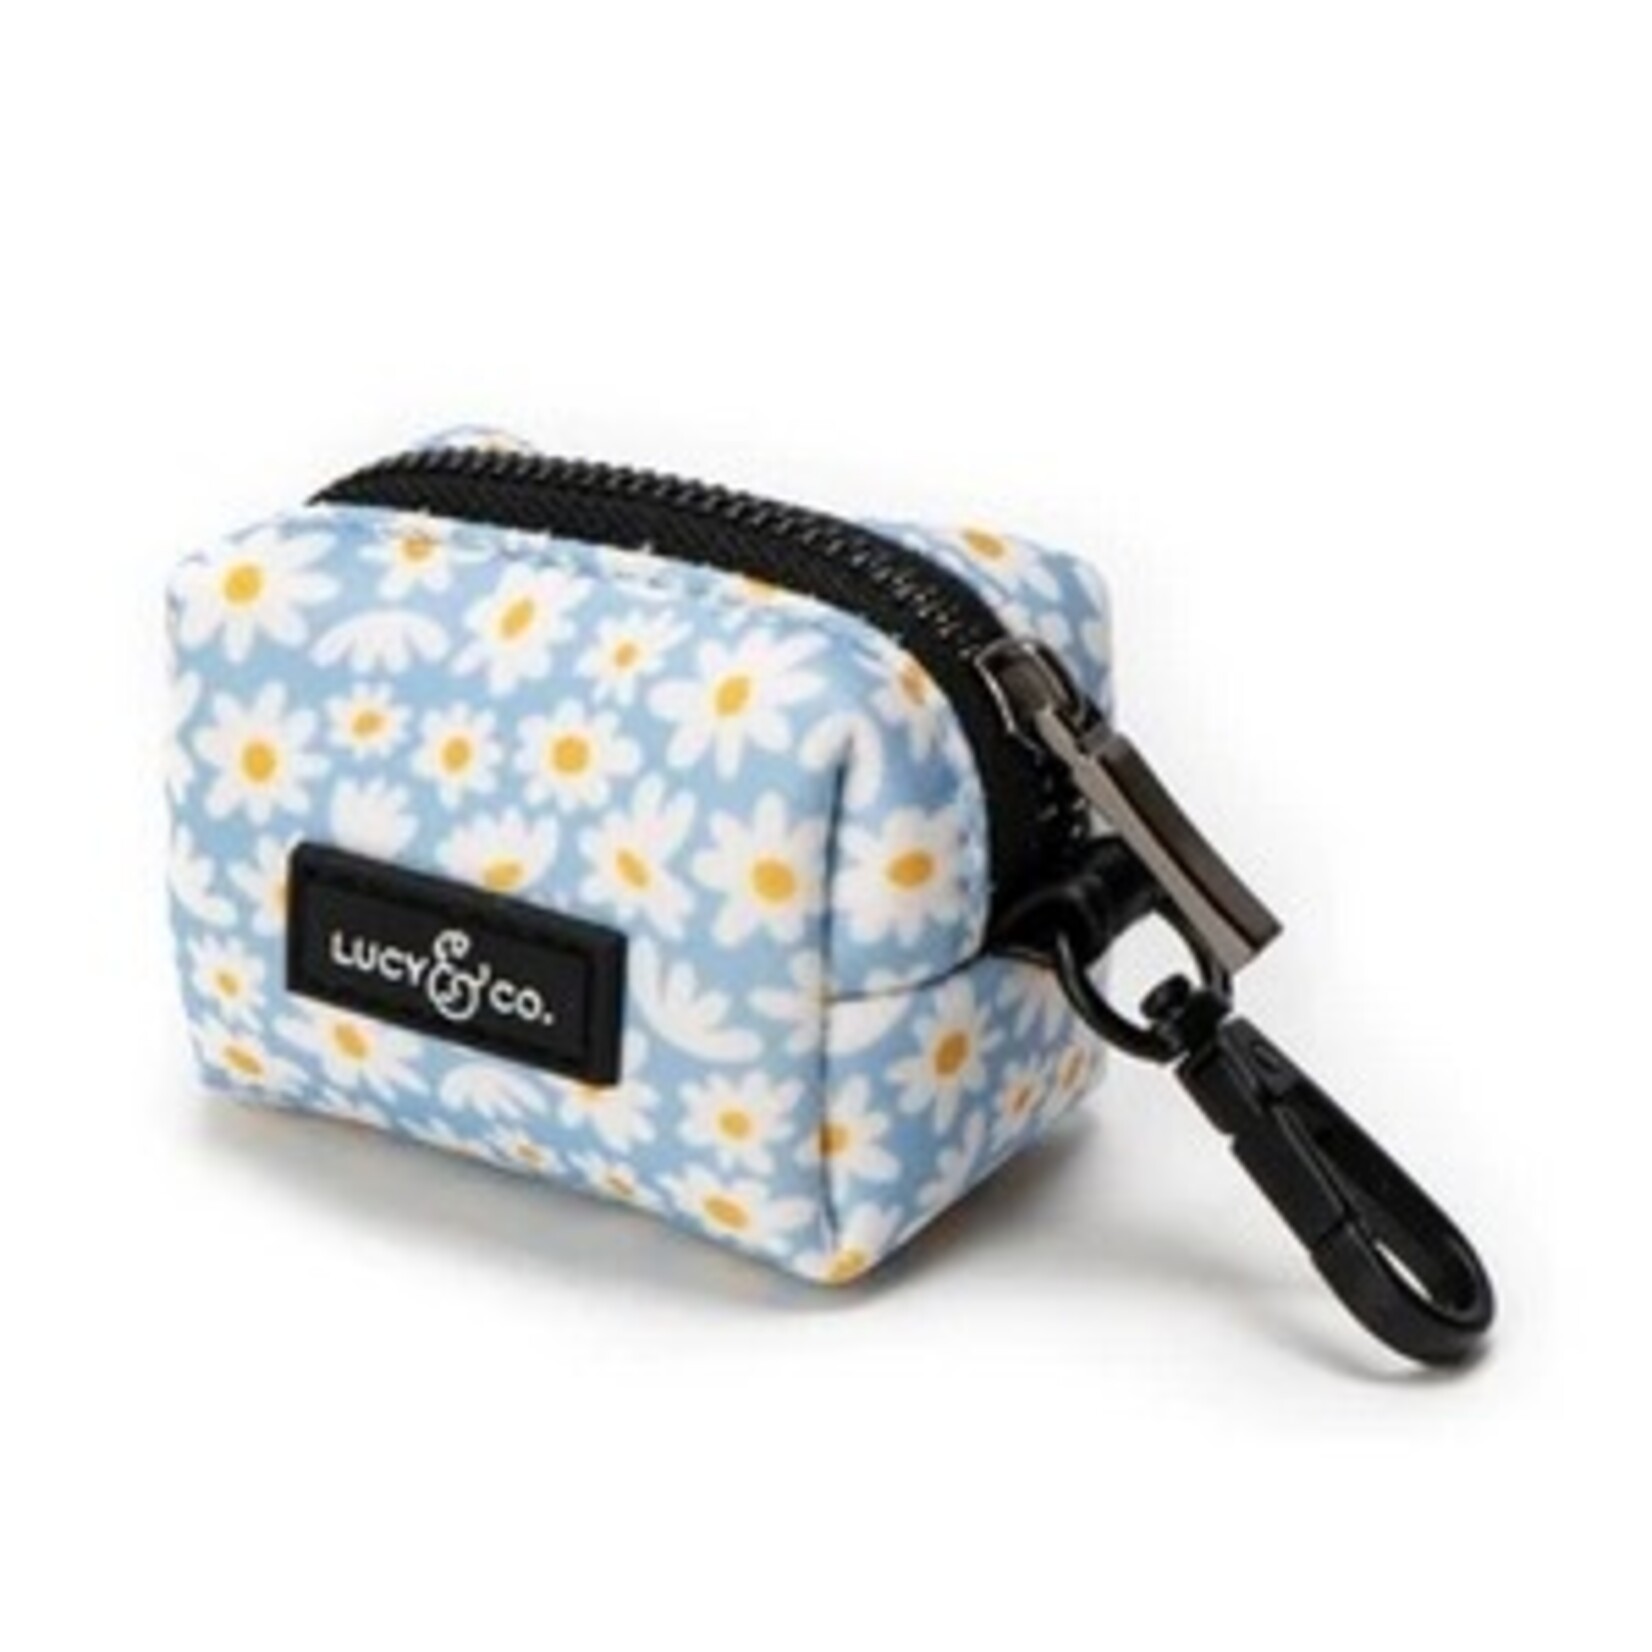 Lucy & Co LUCY & CO Poop Bag Holder